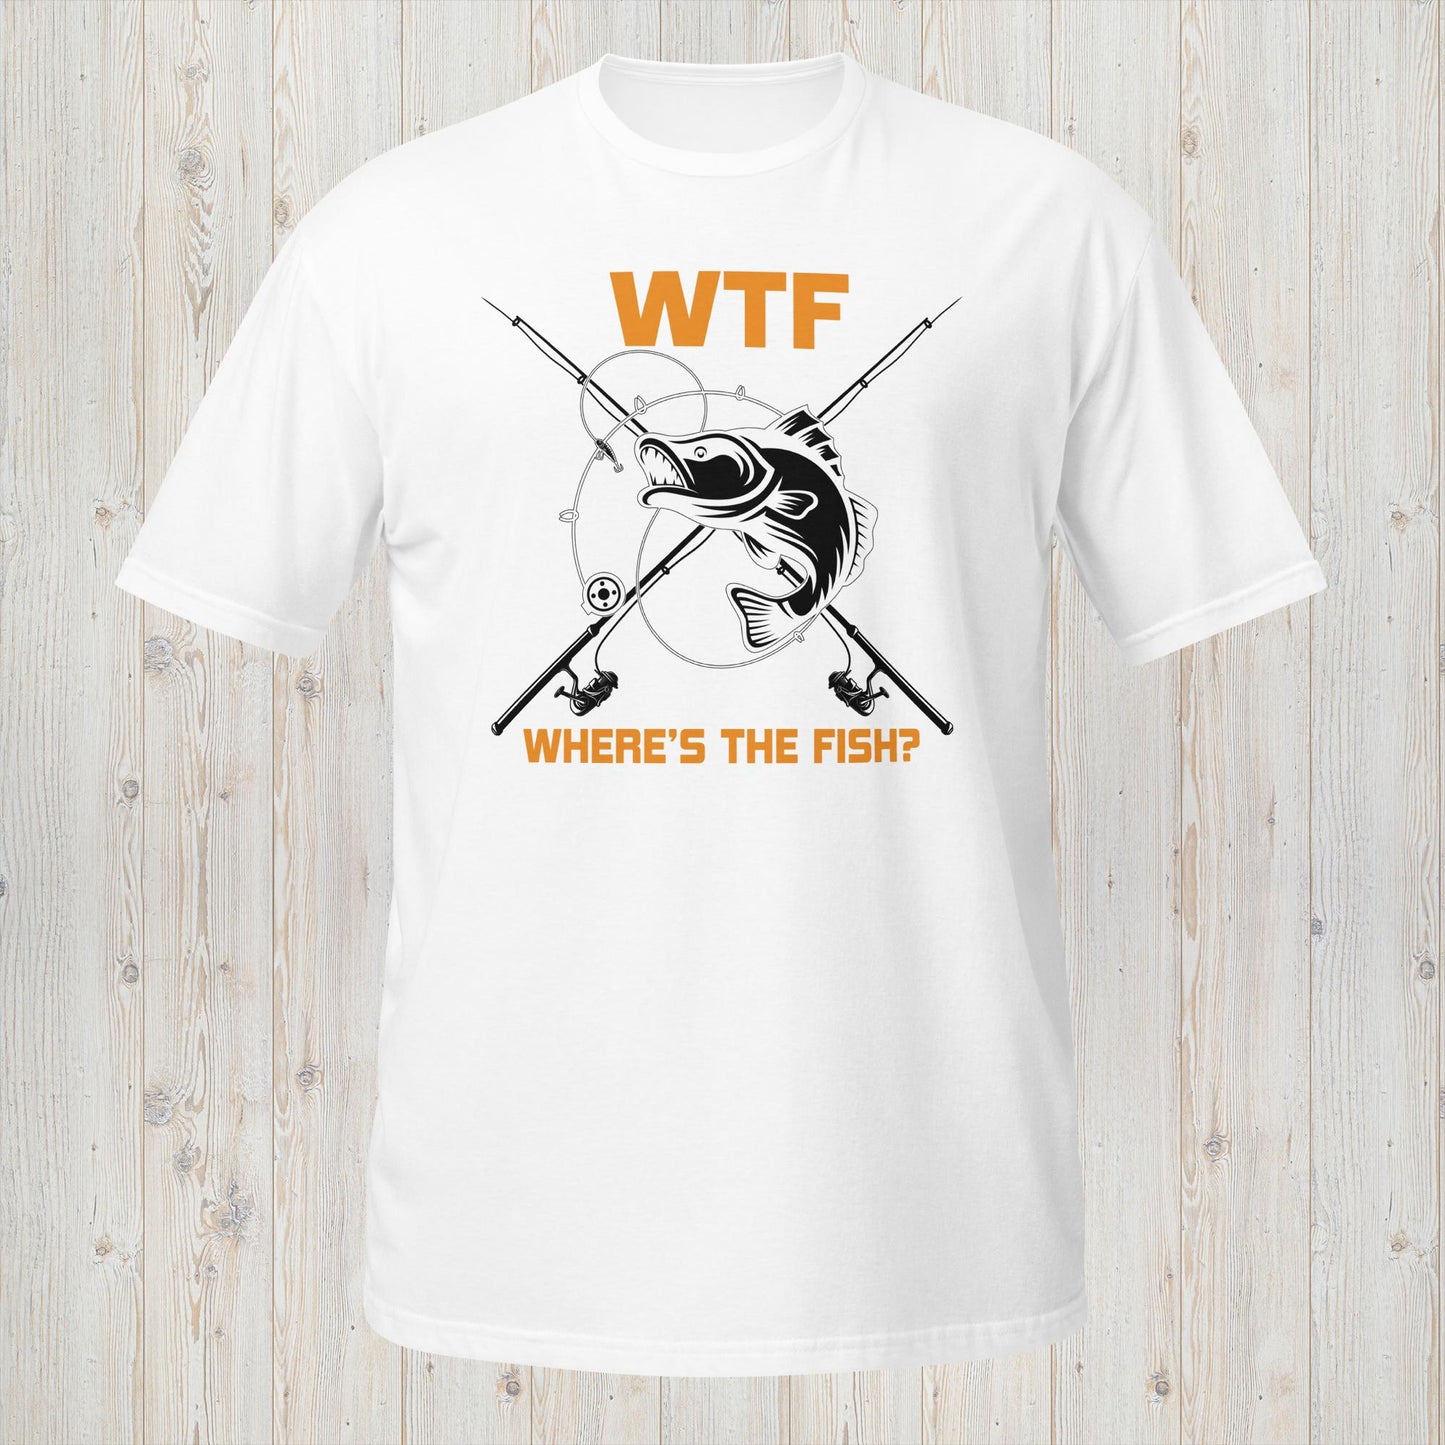 WTF Where's the Fish Tee - Expressive Fishing Quest Statement Shirt